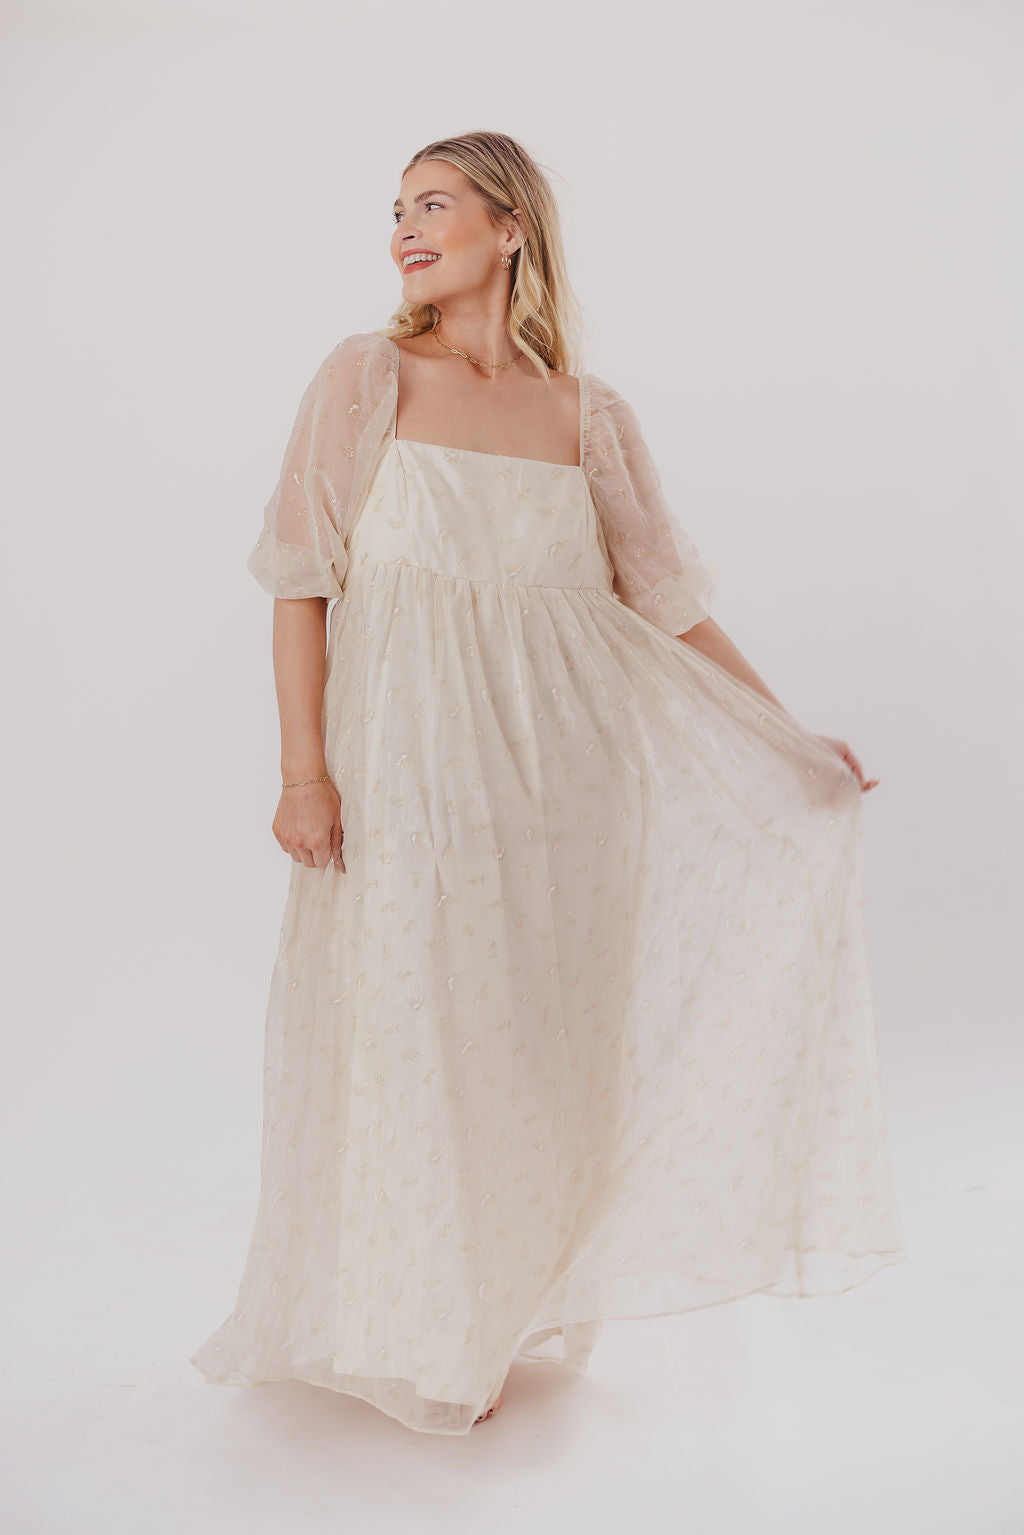 Mona Maxi Dress with Smocking in Butter Floral - Bump Friendly (S-3XL)